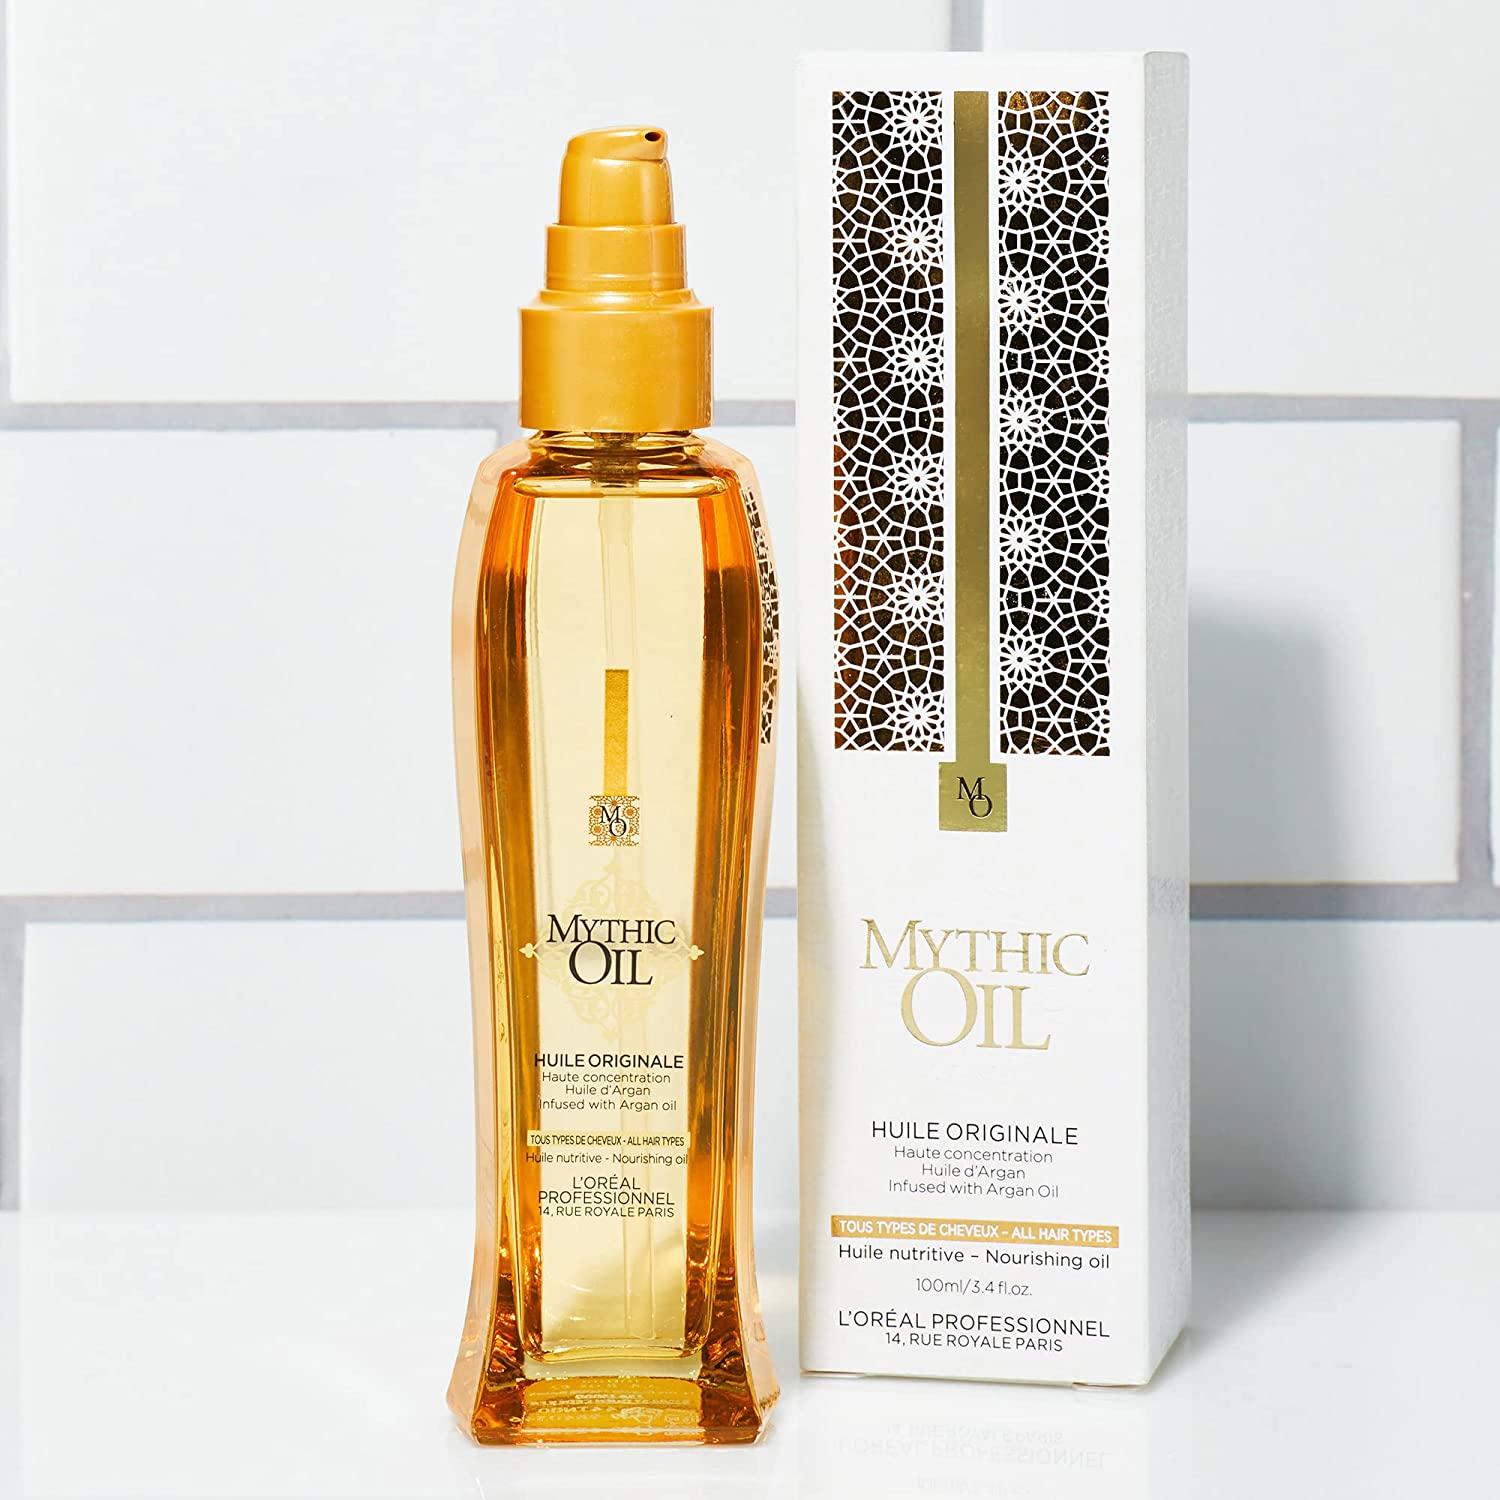 L'Oreal Professionnel Mythic Oil Huile Originale, Leave-In Treatment Serum, Heat Protectant, Anti- Frizz, Adds Softness & Shine, With Argan Oil, For All Hair Types